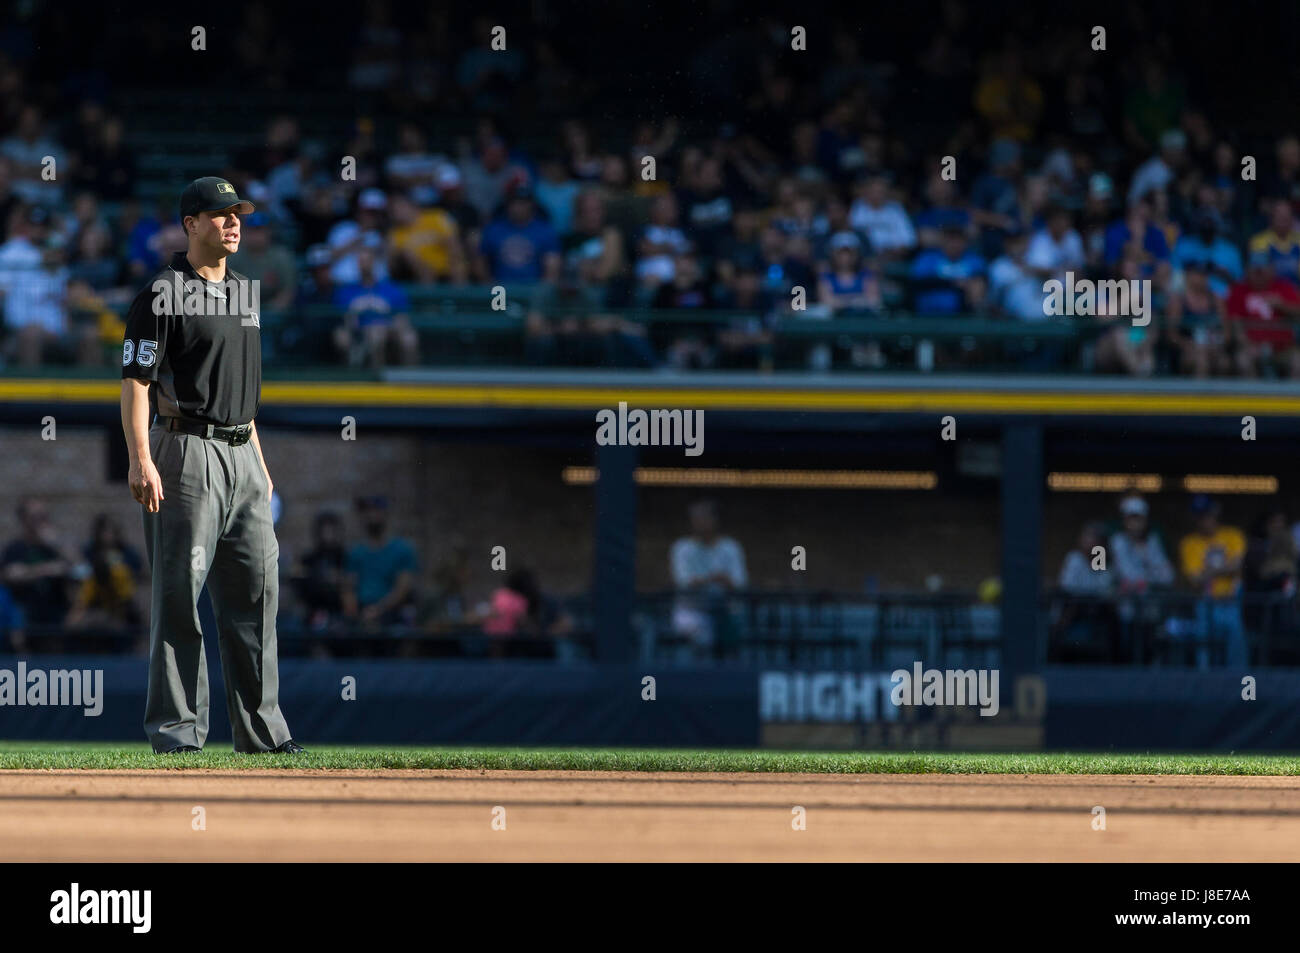 Milwaukee, WI, USA. 27th May, 2017. Major League umpire looks on during the Major League Baseball game between the Milwaukee Brewers and the Arizona Diamondbacks at Miller Park in Milwaukee, WI. John Fisher/CSM/Alamy Live News Stock Photo